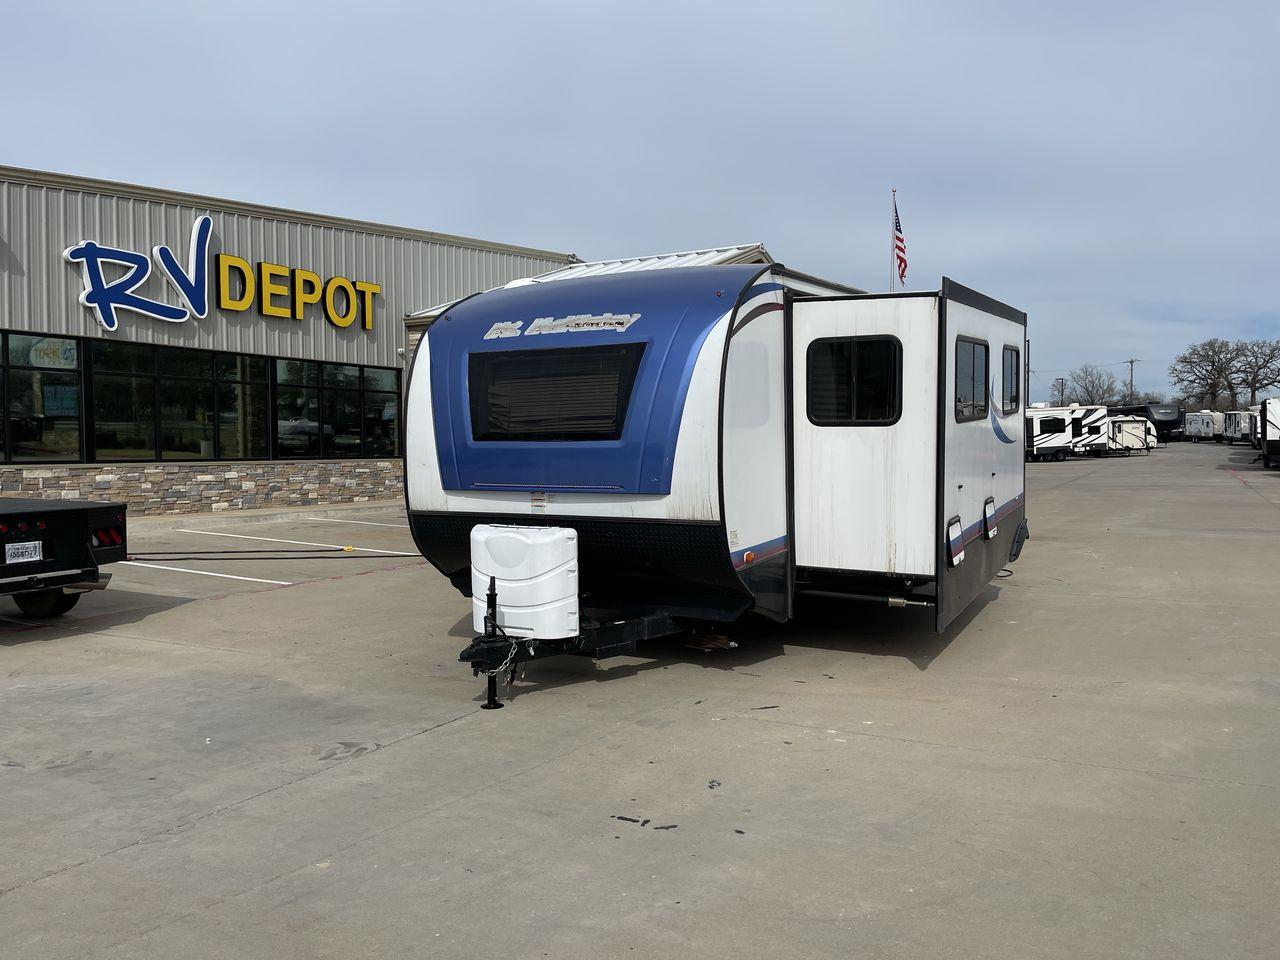 2018 WHITE MT MCKINLEY 830FK (59CCC3221JL) , Length: 32 ft | Dry Weight: 5,660 lbs. | Slides: 1 transmission, located at 4319 N Main Street, Cleburne, TX, 76033, (817) 221-0660, 32.435829, -97.384178 - Take the 2018 Mt. McKinley 830FK Travel Trailer on your upcoming journey. This travel trailer provides a well-thought-out living area for your outdoor adventures, all while being tailored for comfort and convenience. This unit measures 32 ft in length by 8 ft in width. It has a dry weight of 5,66 - Photo #0